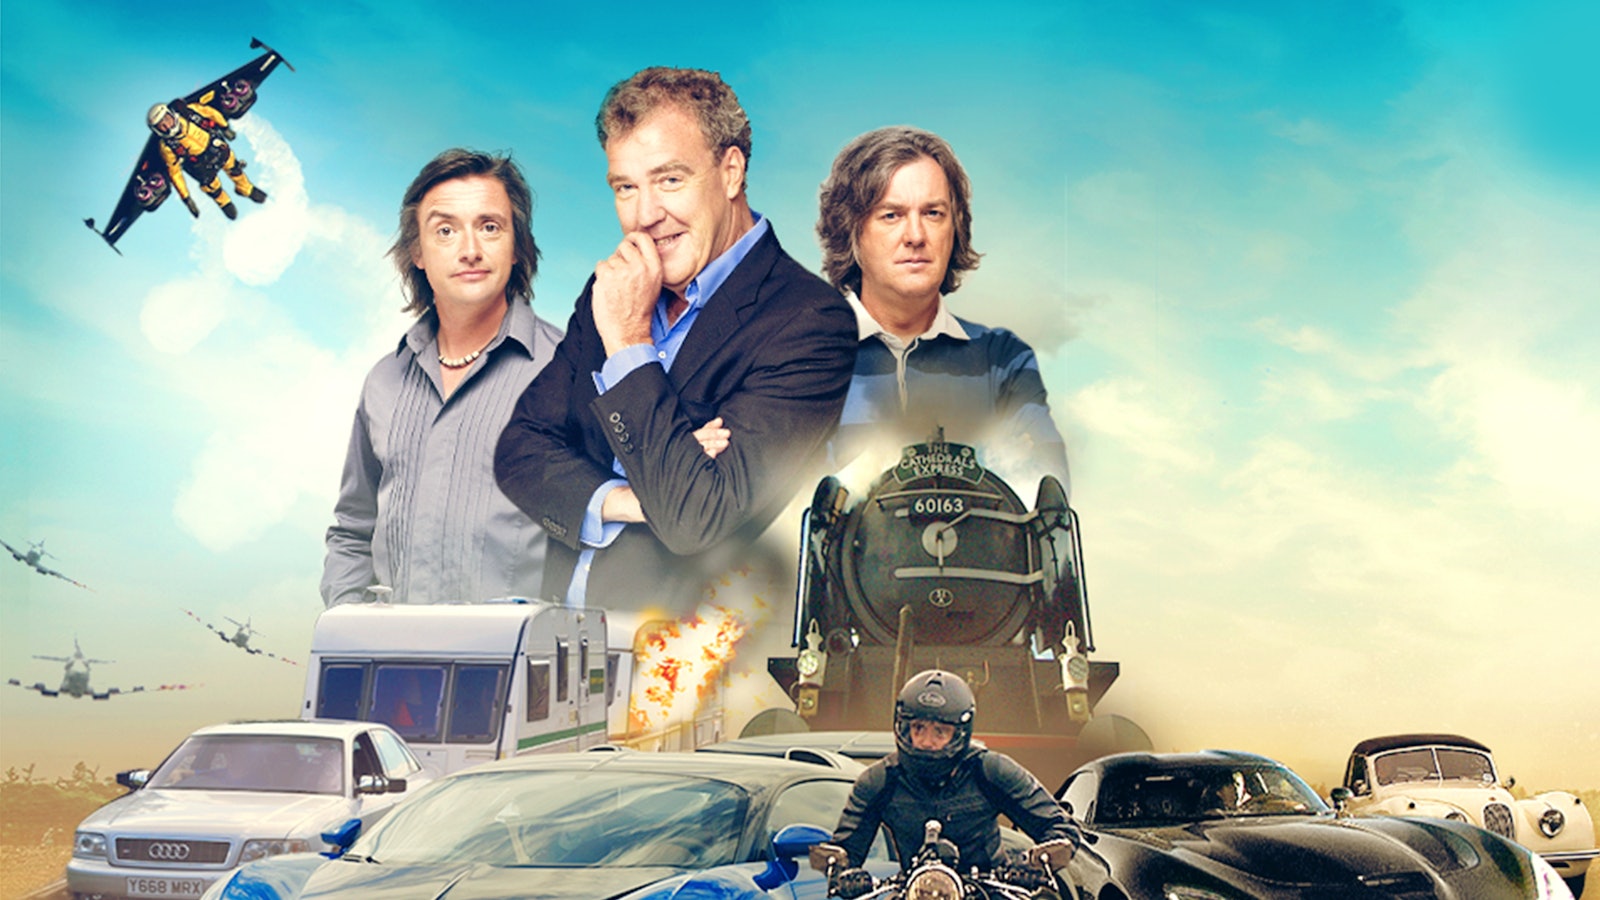 Top Gear: Planes, Trains - Watch Free on Pluto United States